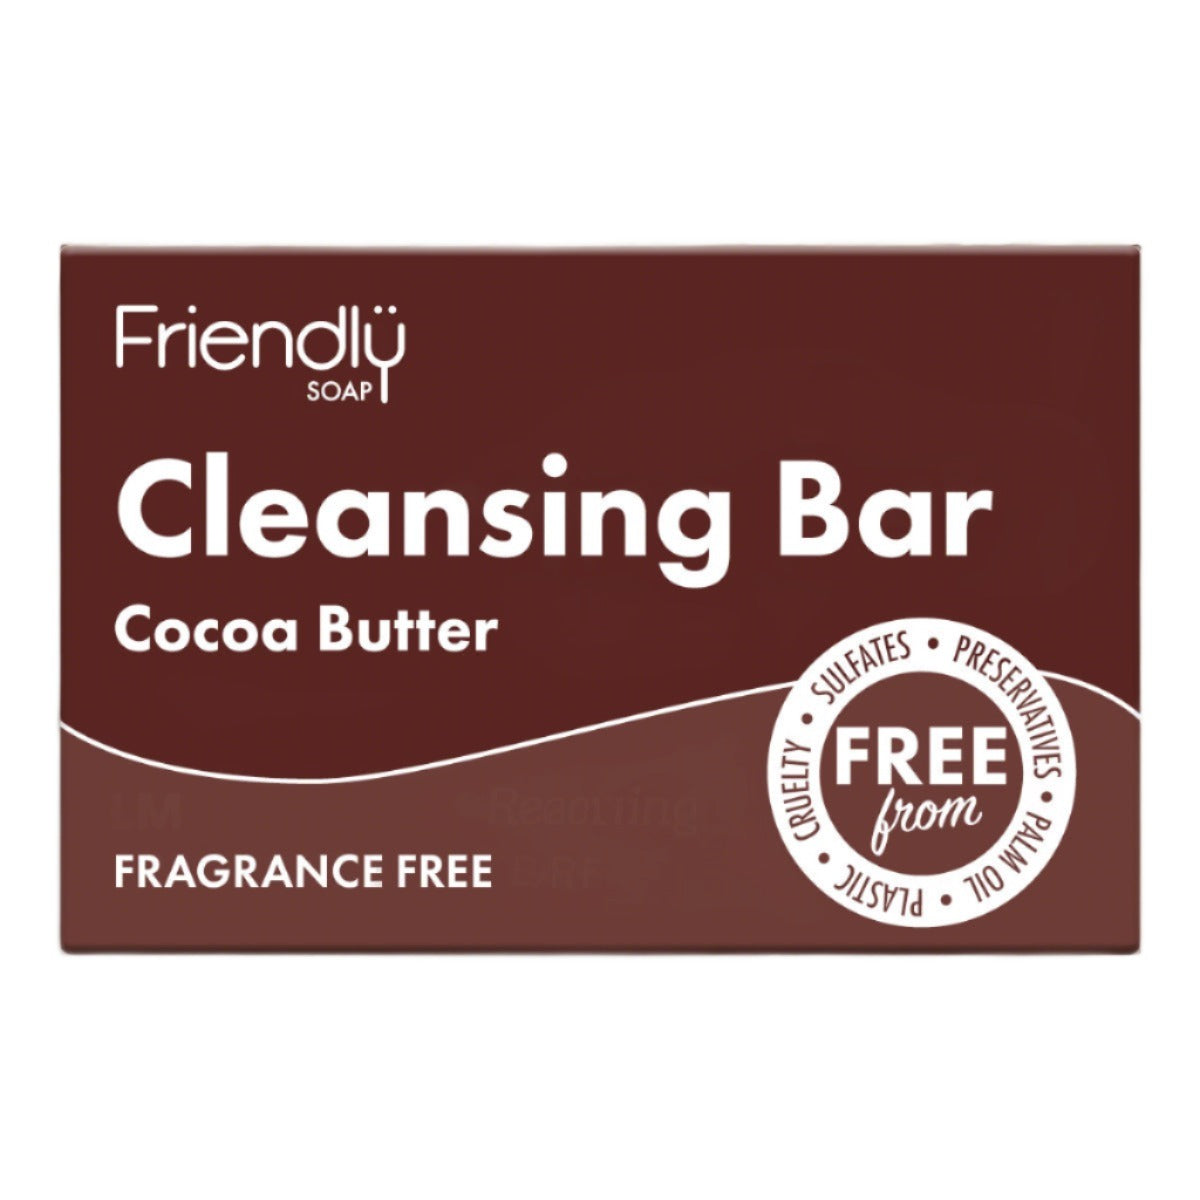 Cleansing Bar - Cocoa Butter - Fragrance-free